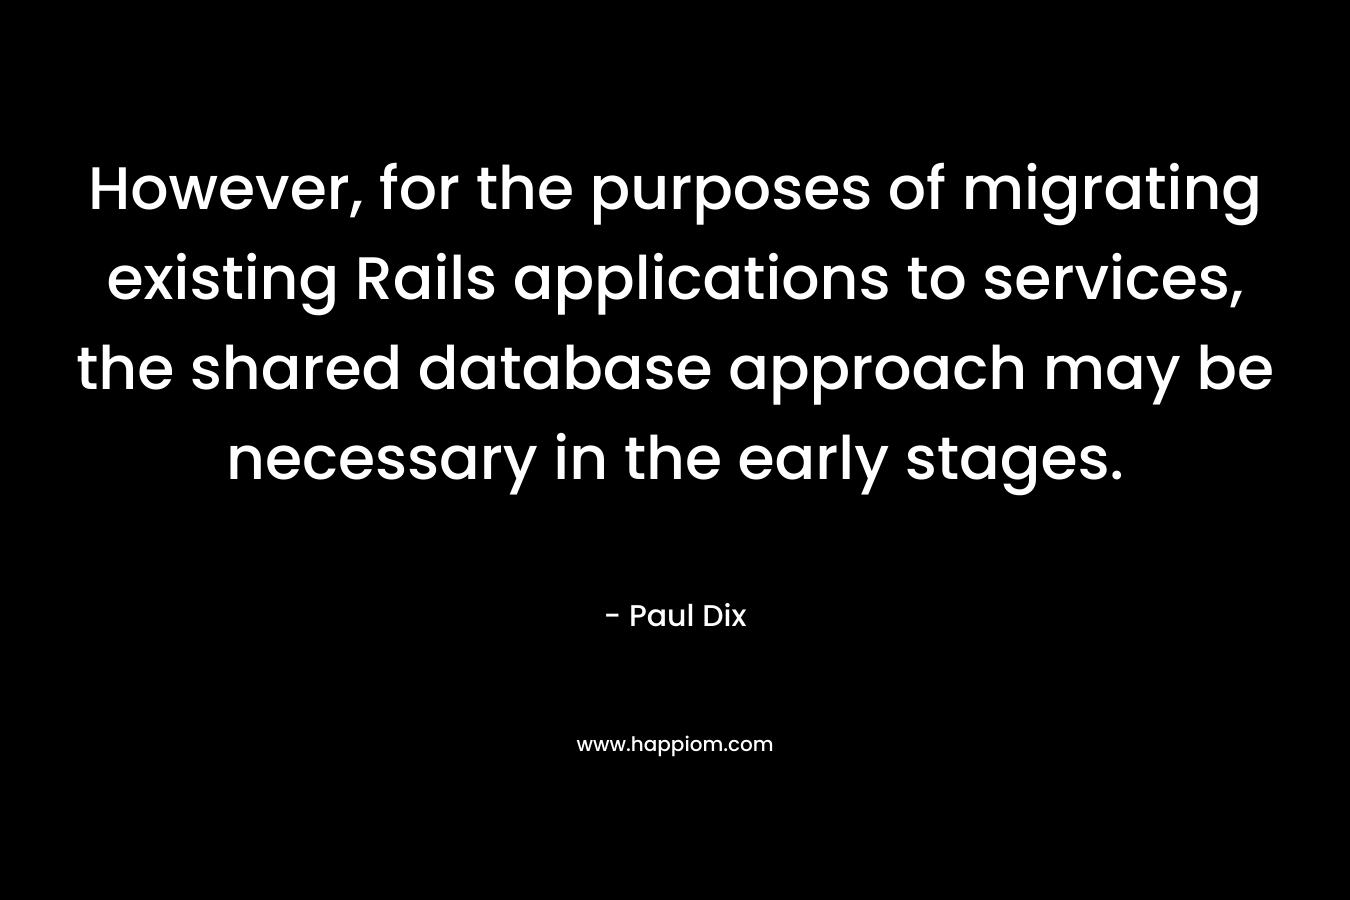 However, for the purposes of migrating existing Rails applications to services, the shared database approach may be necessary in the early stages. – Paul Dix